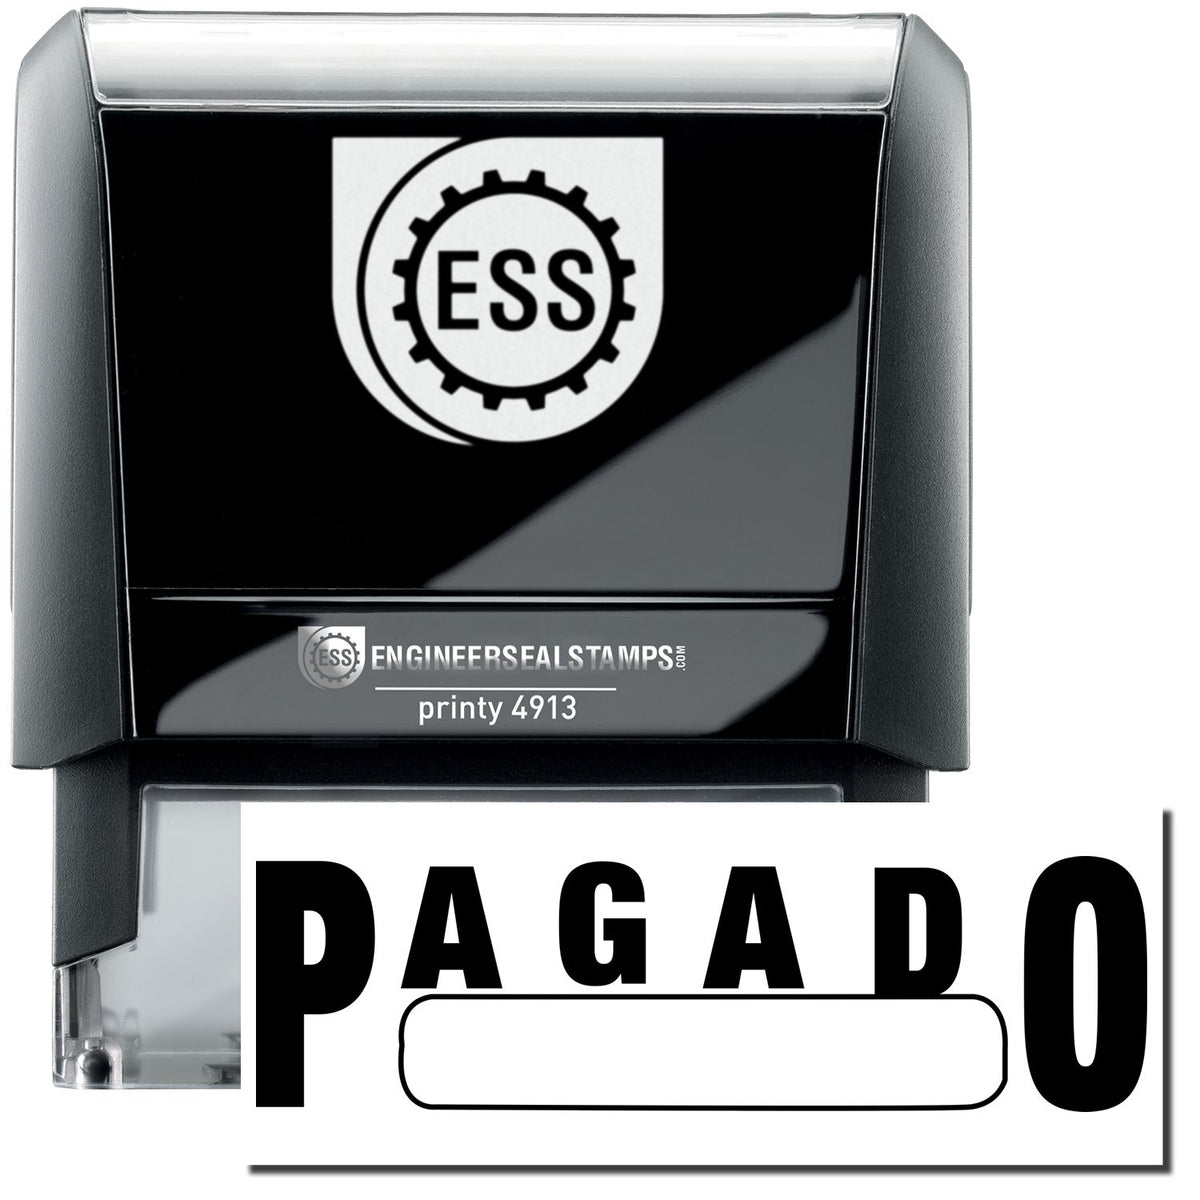 A self-inking stamp with a stamped image showing how the text &quot;PAGADO&quot; in a large font with a Box under it is displayed after stamping.